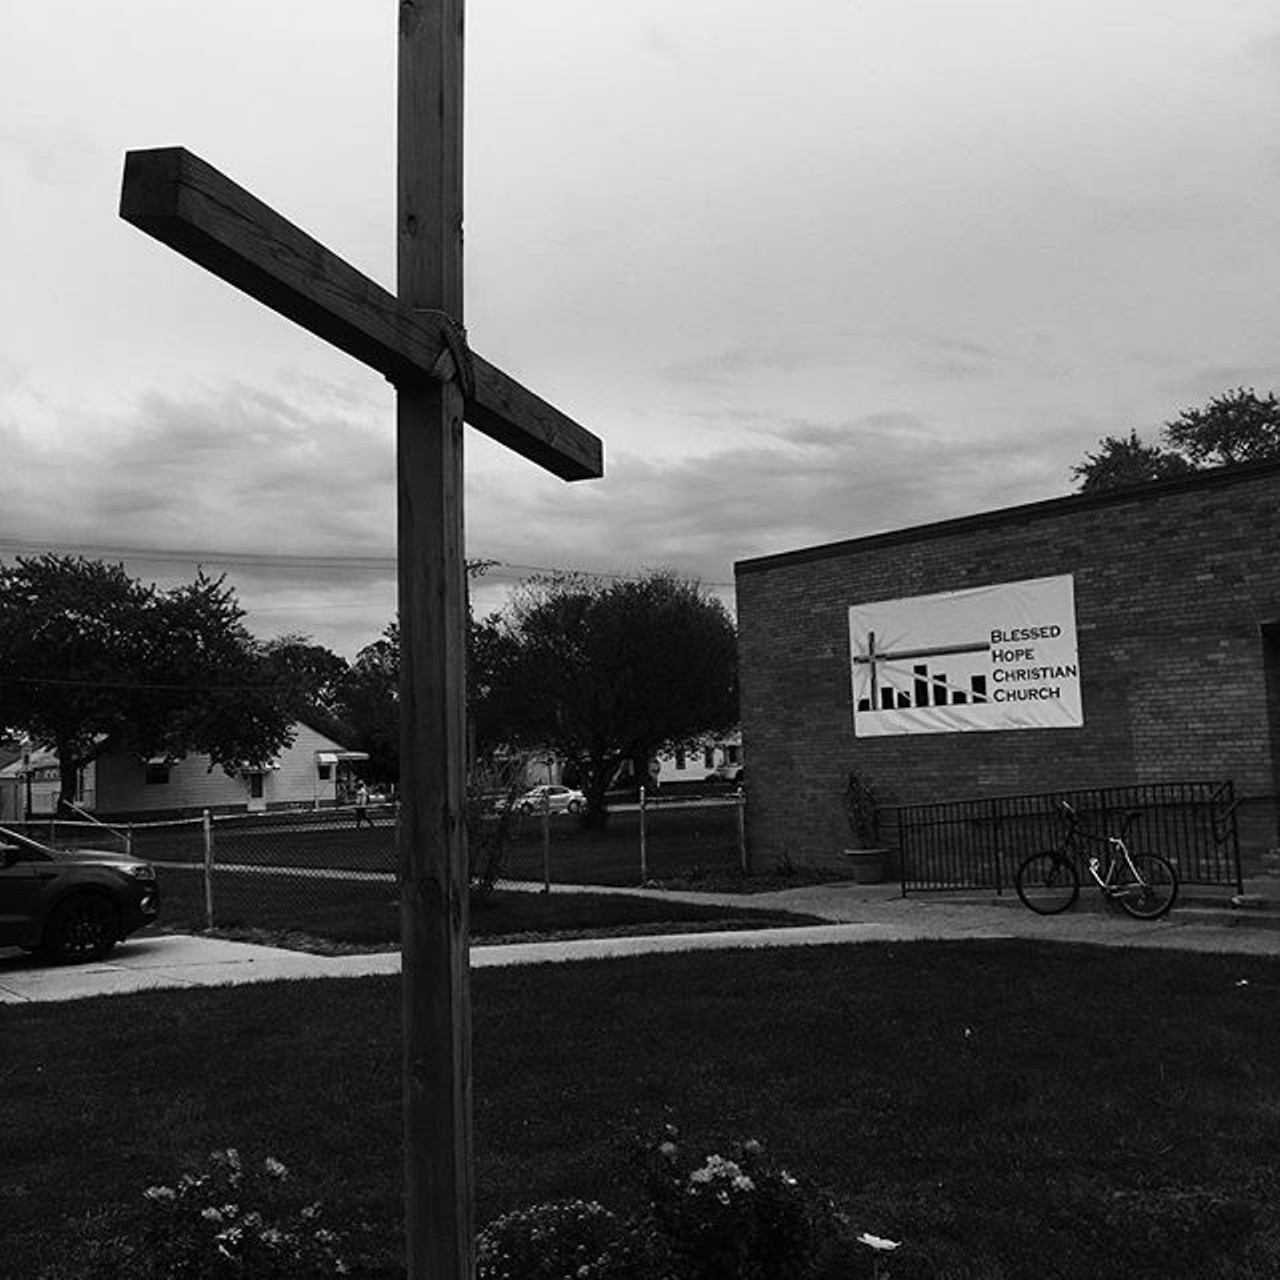 Blessed Hope Church
3804 Hazel Ave., Lincoln Park; 313-388-1499
The Blessed Hope Church is dedicated to serving the community seven days a week. Their food pantry is open three days a week to those who need food assistance and also serves hot meals Monday through Friday and Sunday. The Blessed Hope Church also accepts all kinds of donations. 
Photo via Instagram user@broadwayboy81